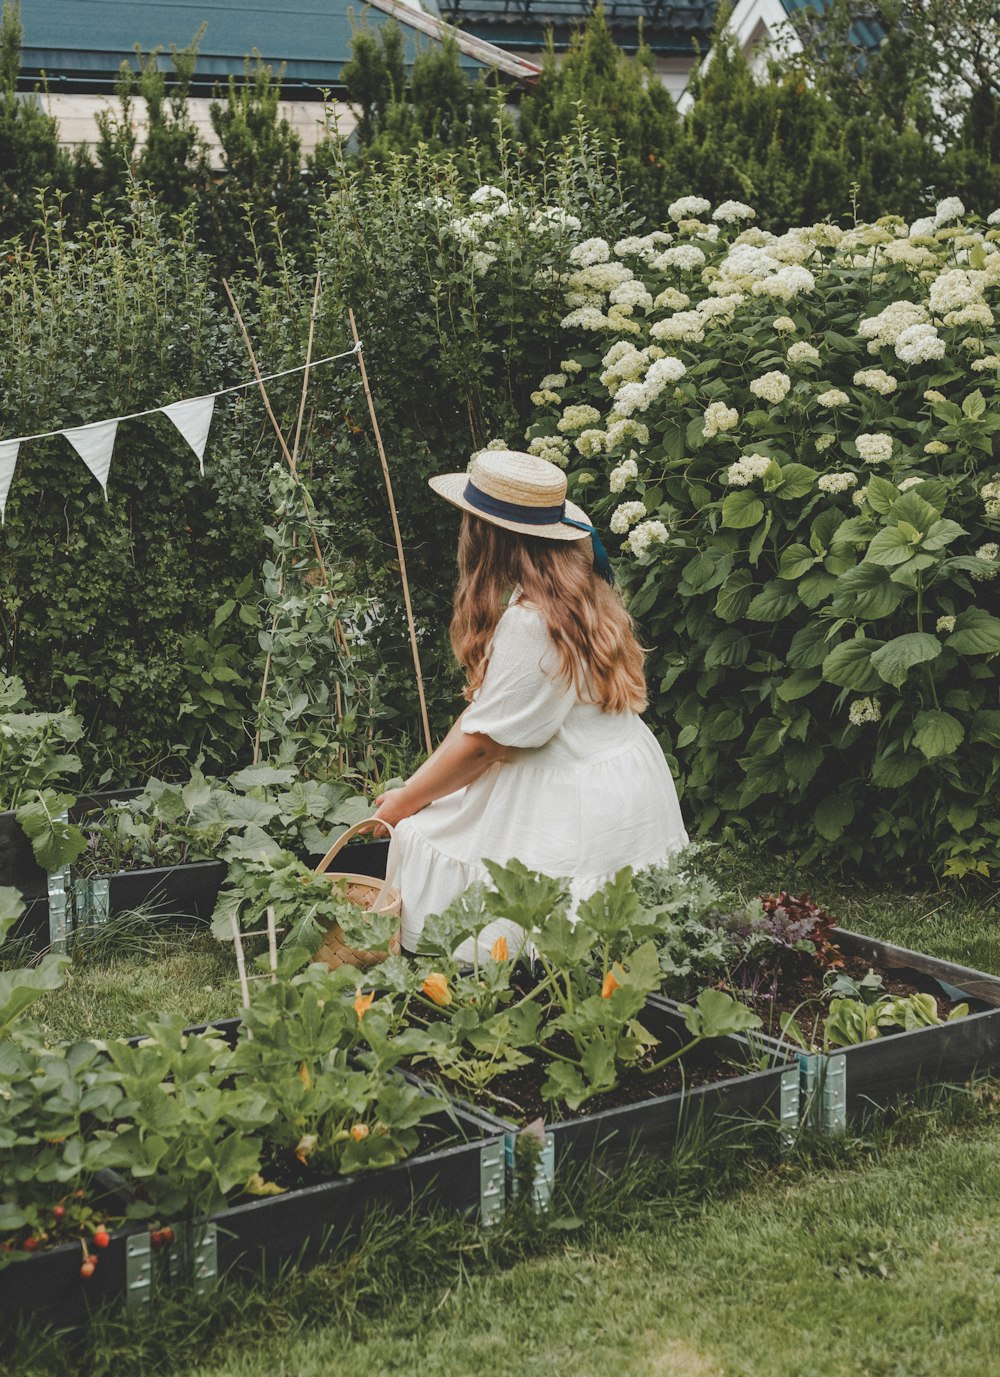 a woman in a white dress and hat tending to a garden